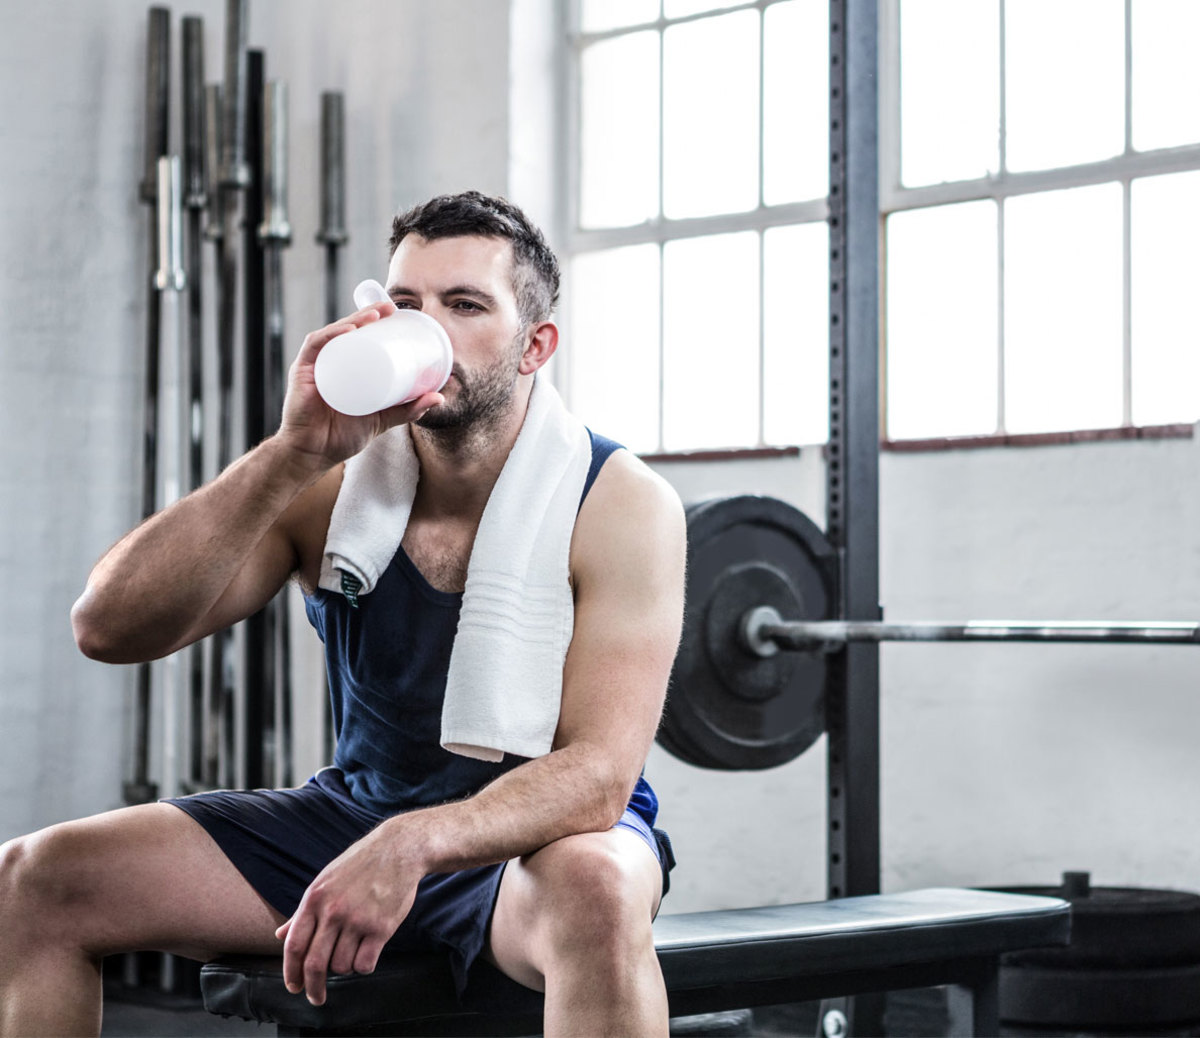 When To Drink Protein Shakes: Before or After Your Workout? - Men's Journal